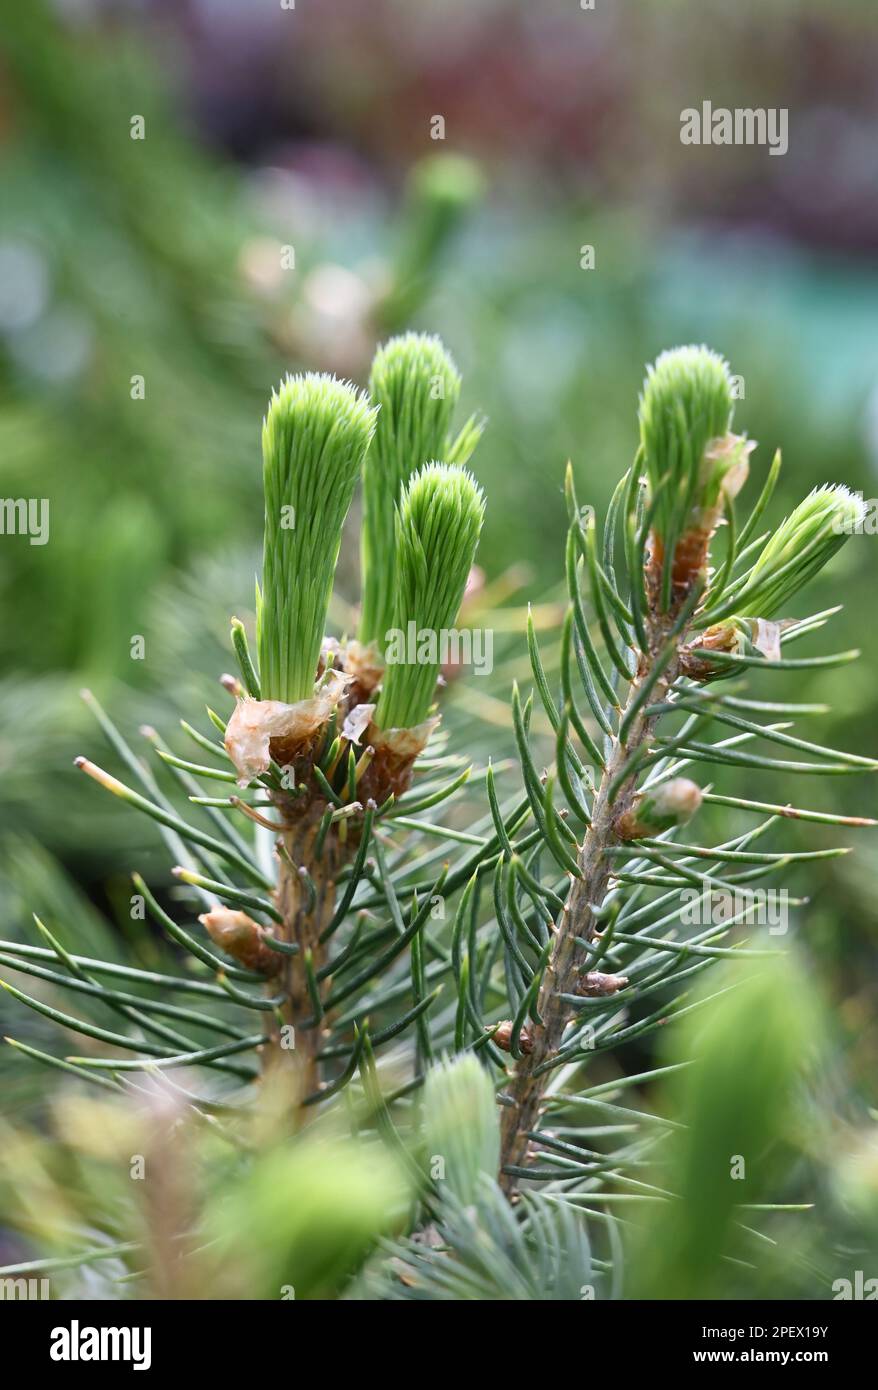 Young shoots of spruce branch. Macro shooting. Wild forest nature. Blurred background Stock Photo